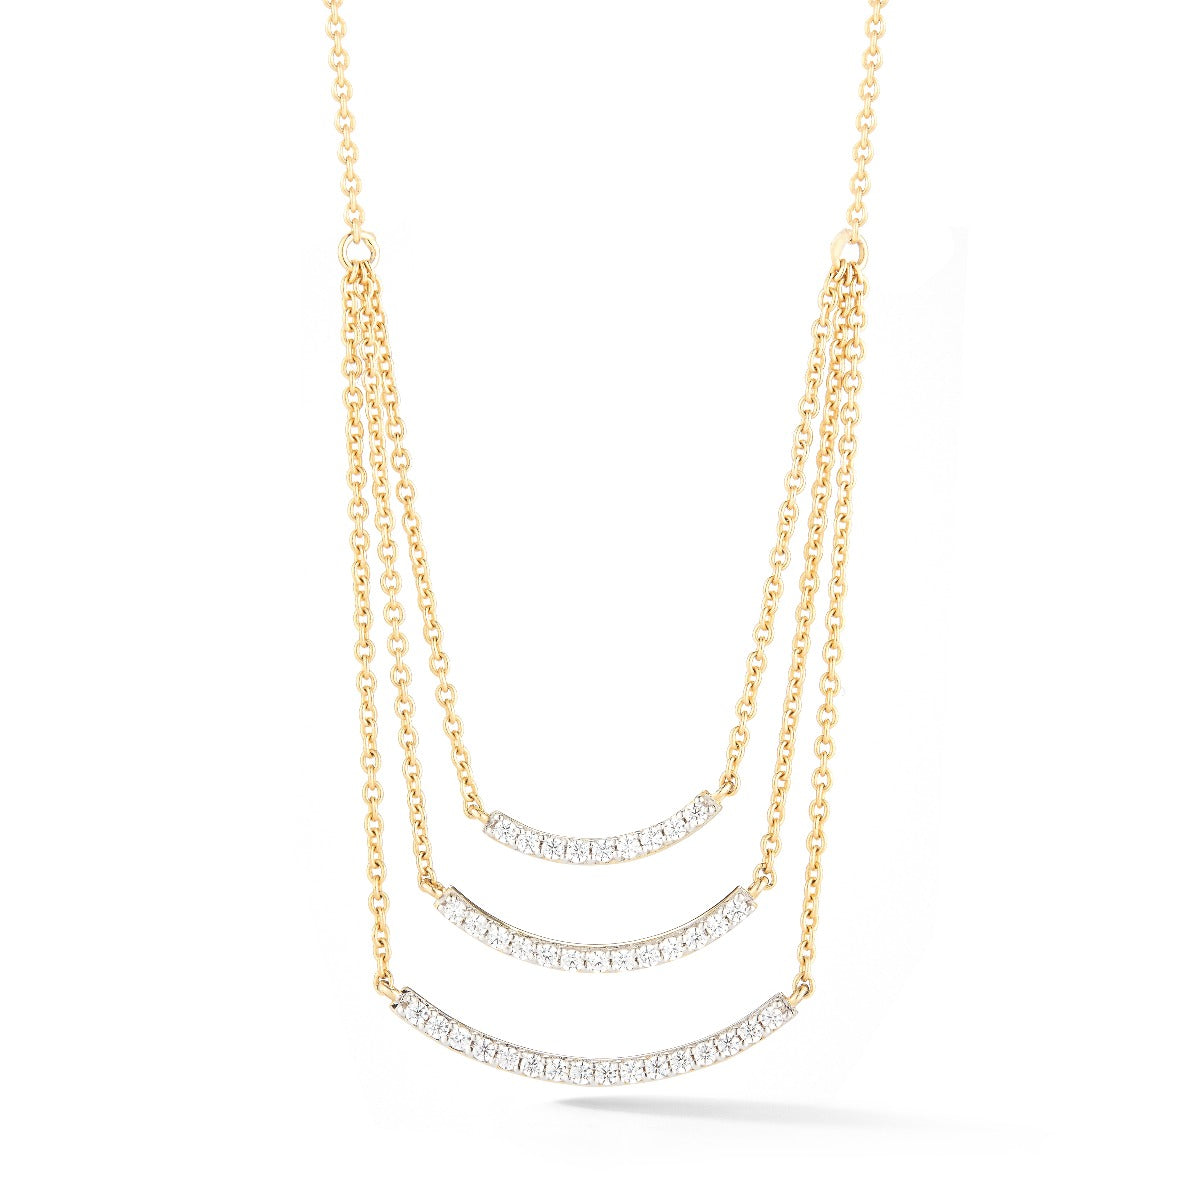 14K ORIGINAL TRIPLE BAR NECKLACE WITH DIAMONDS 0.42CT 3/4 ON 18 INCHES CHAIN